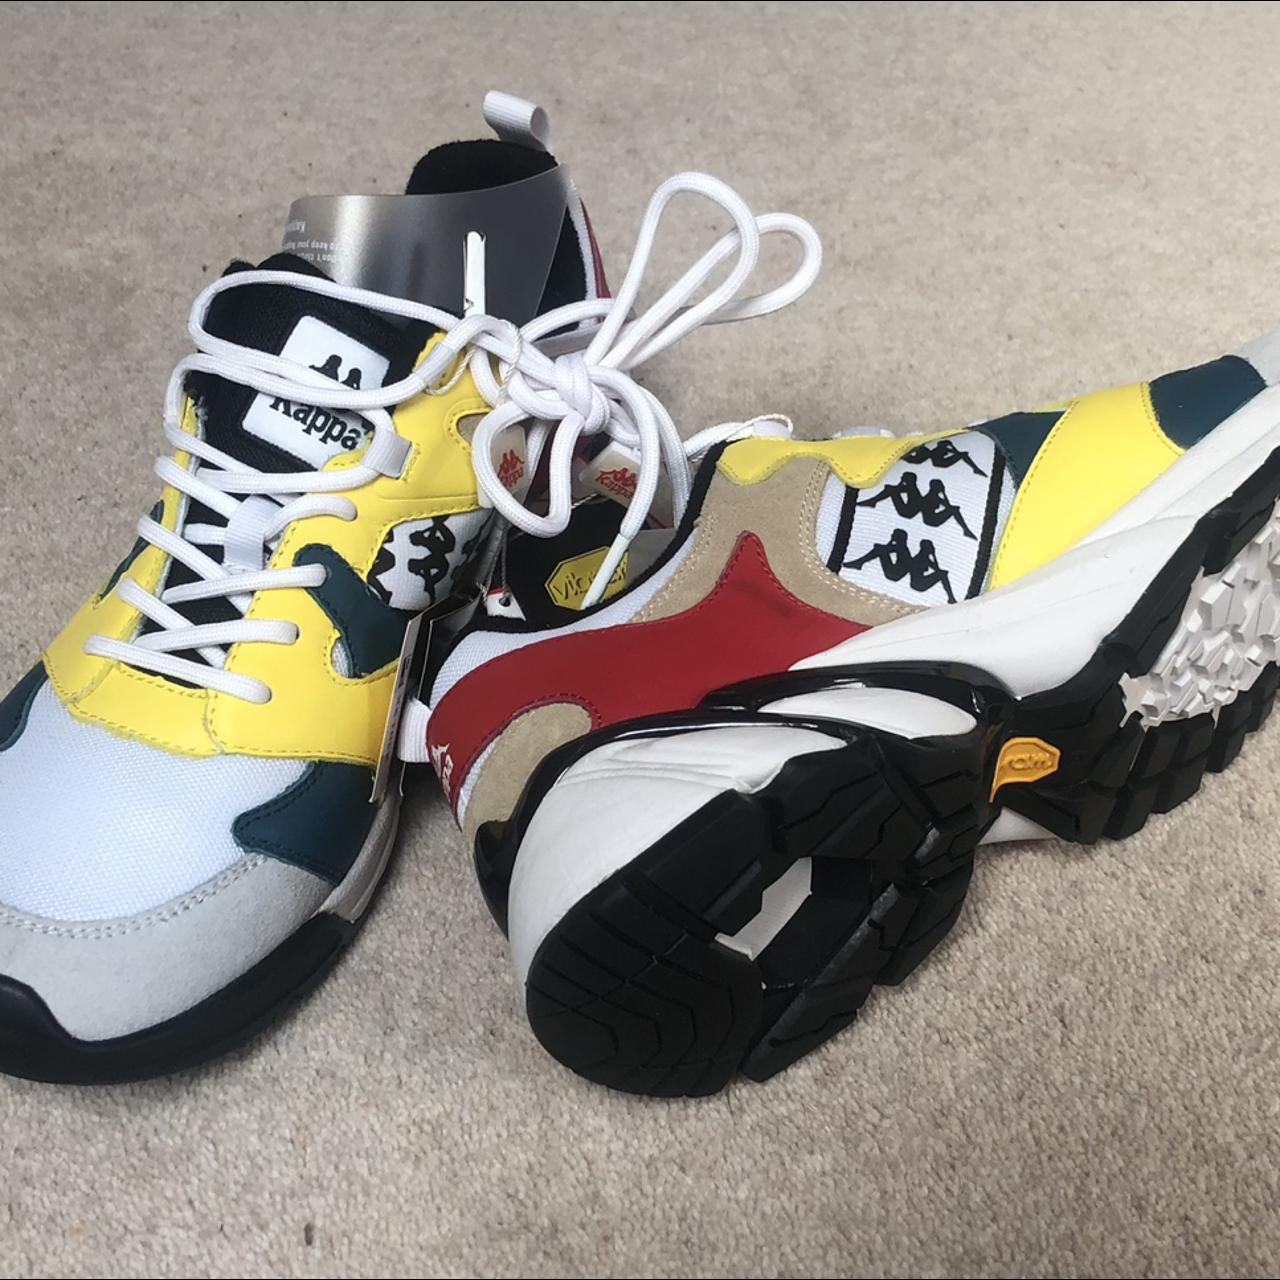 Kappa multi colour with... Brand Depop trainers/shoes new 